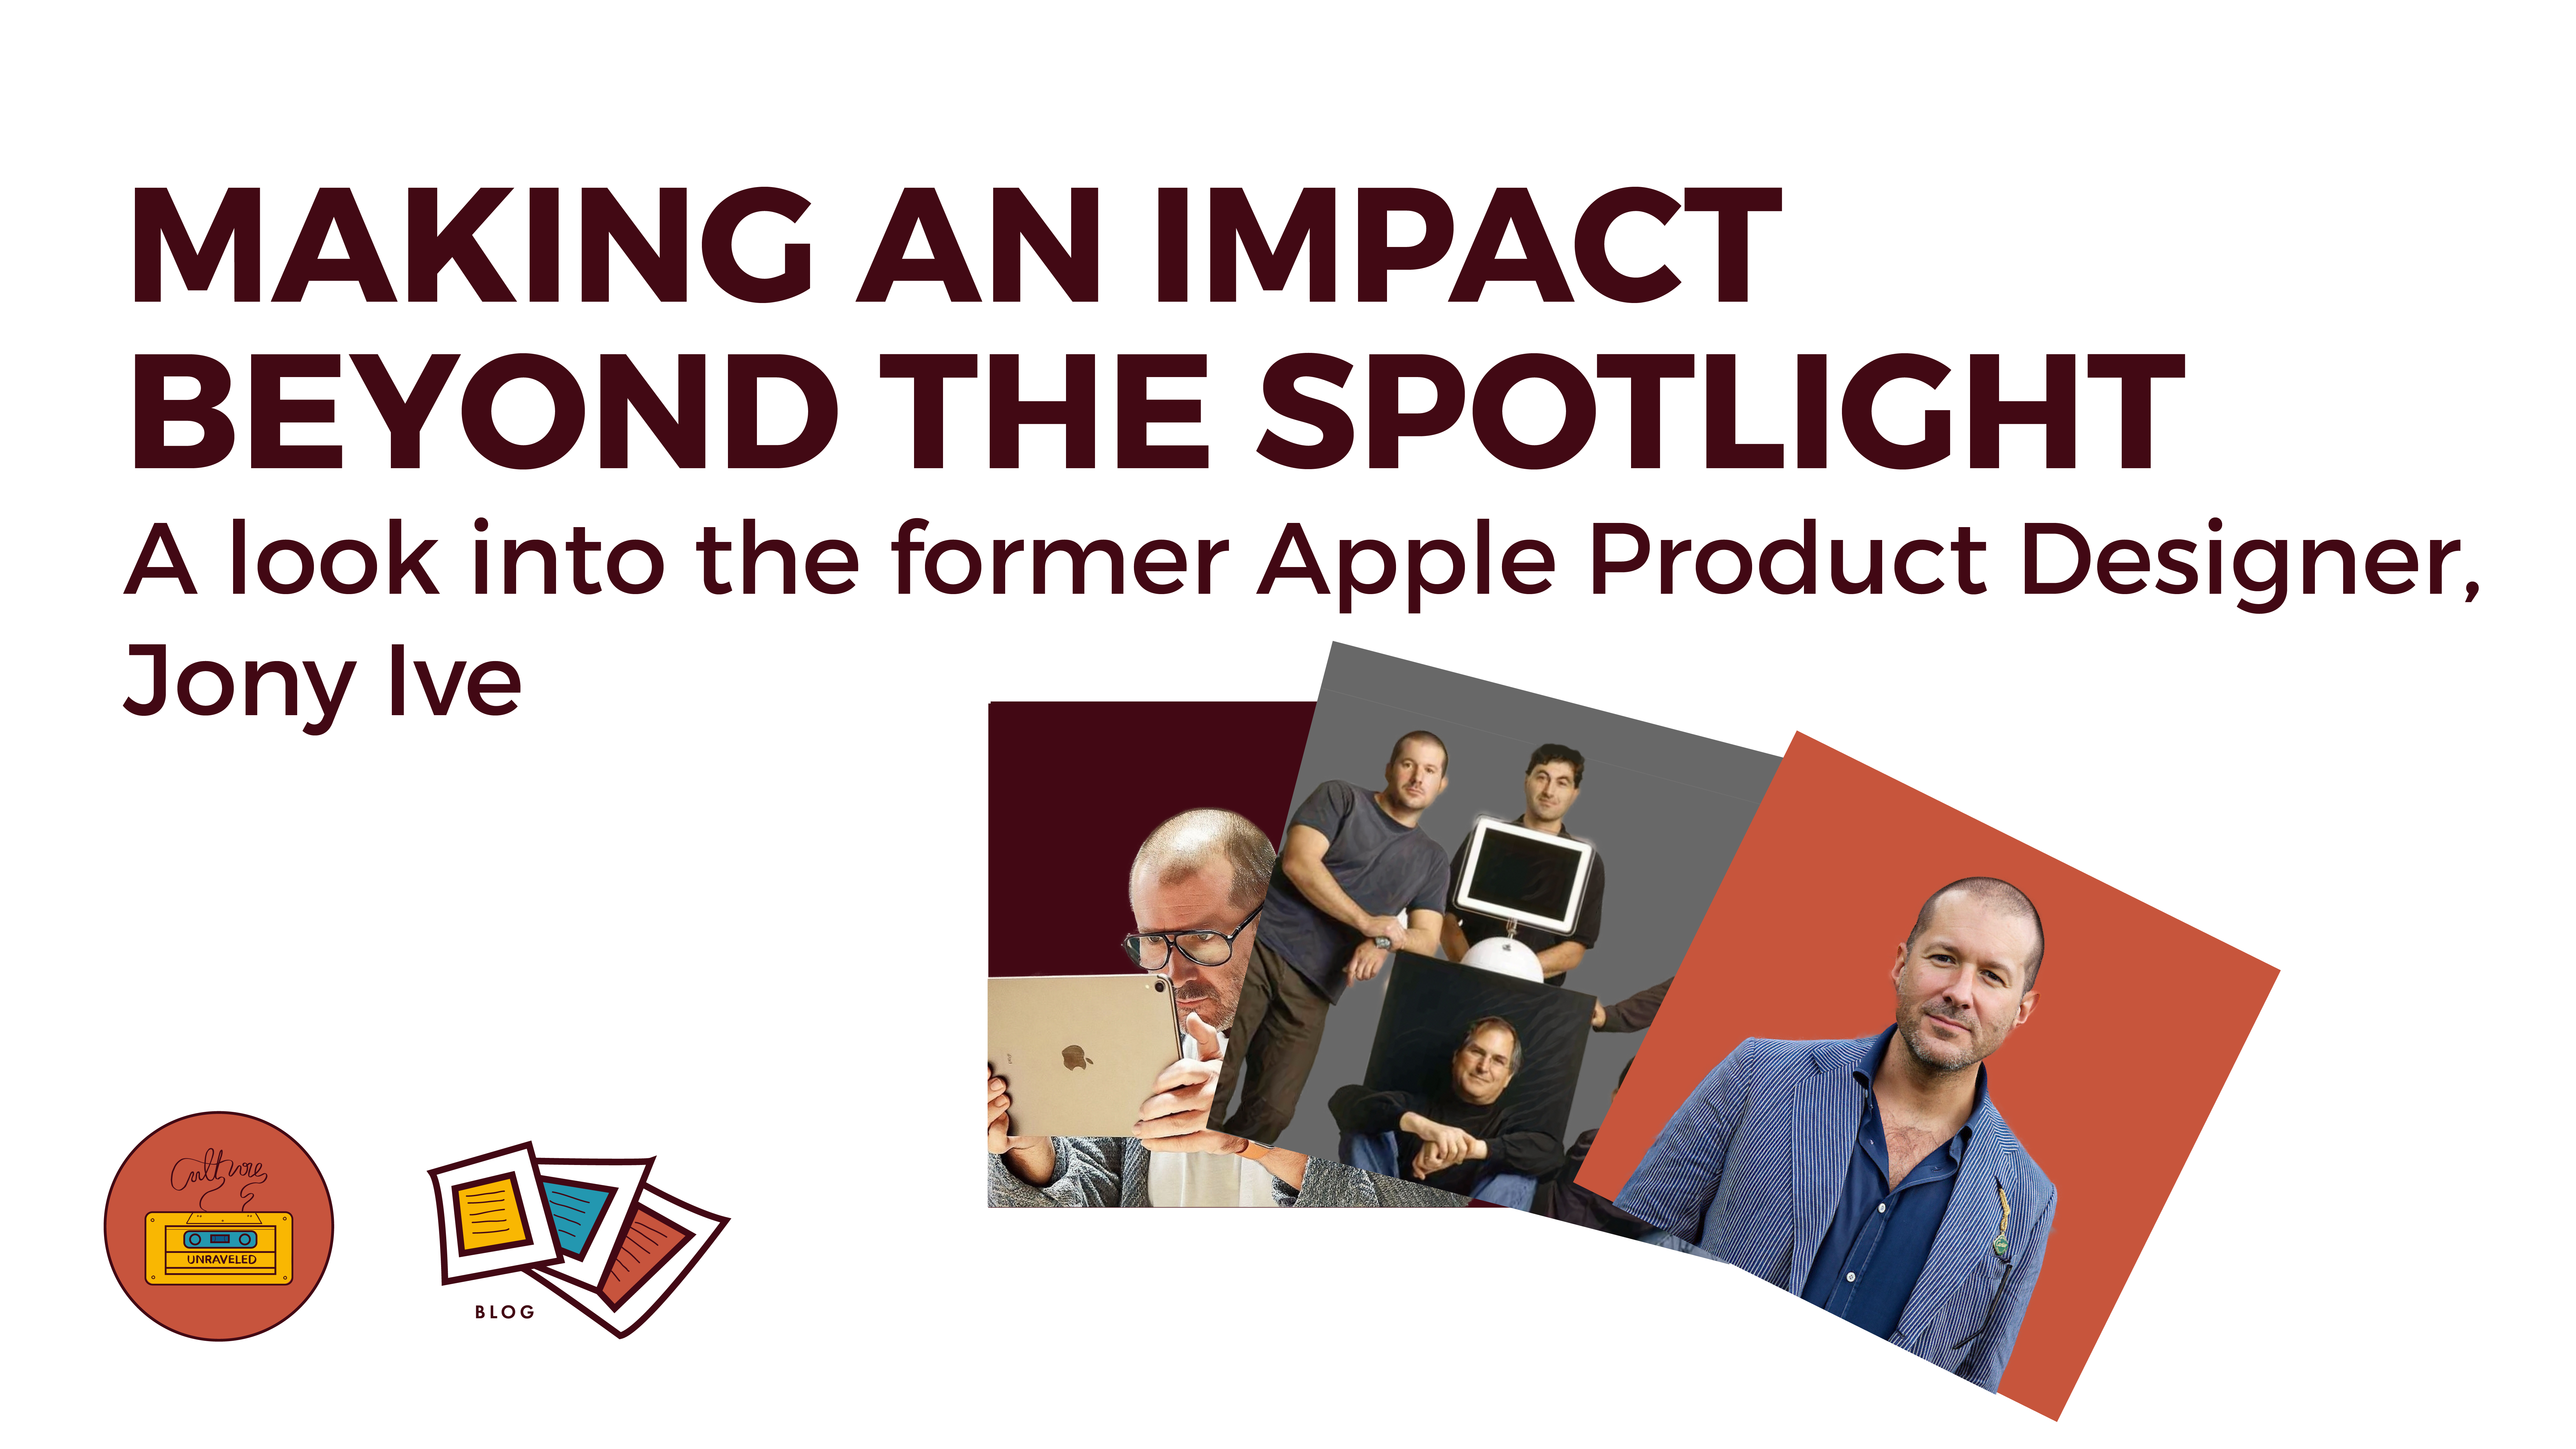 Making an Impact Beyond the Spotlight. A Look into former apple product designer, Jony Ive